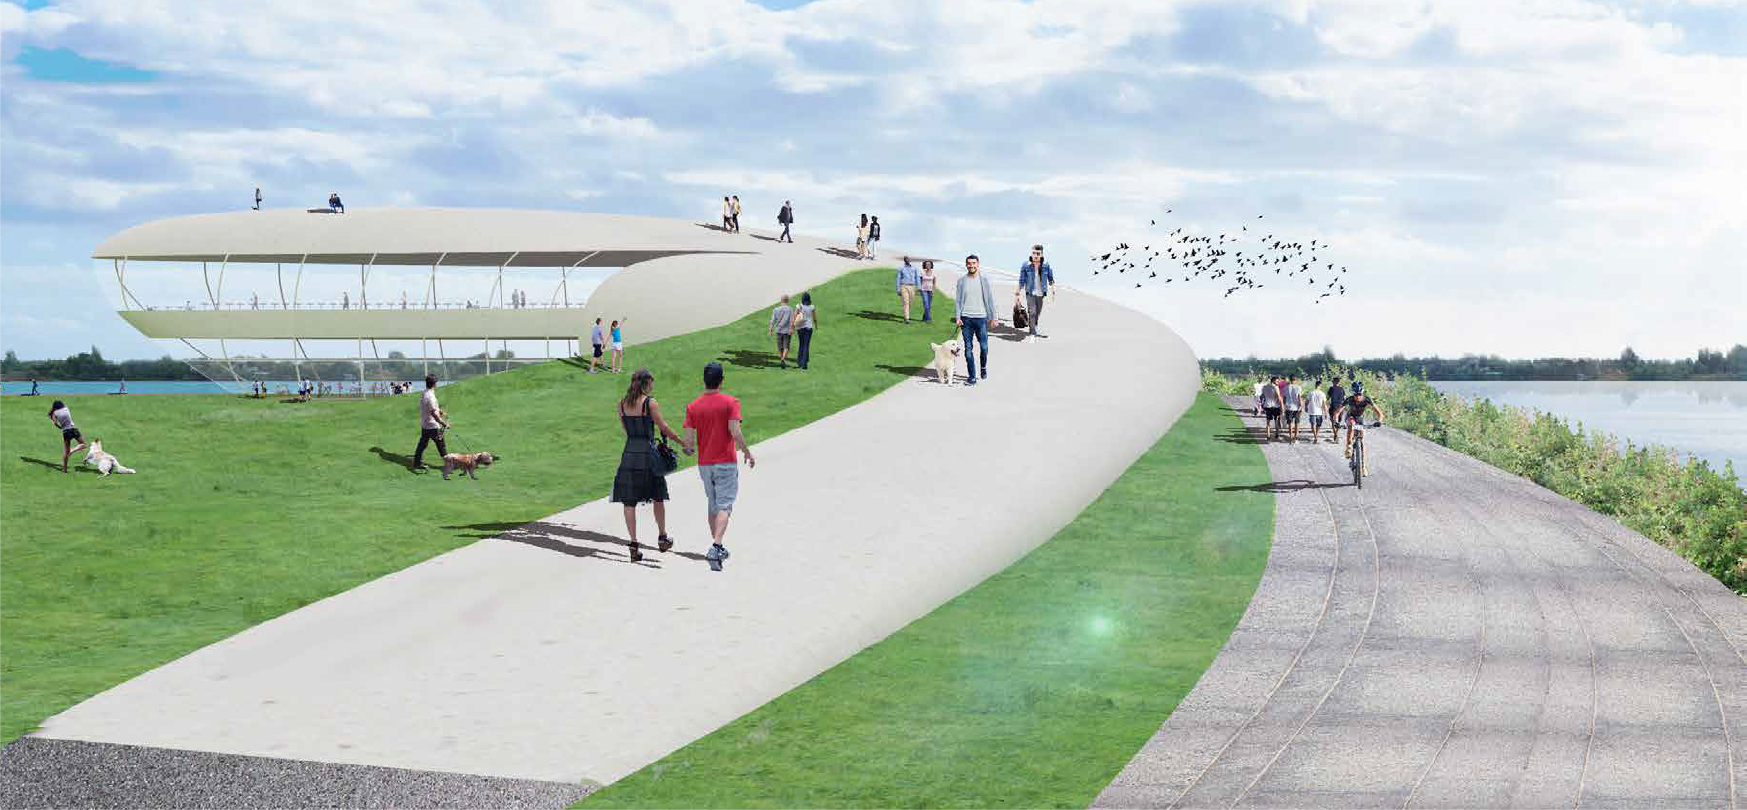 Architectural rendering: A curving ramp leading to the top of a rounded, primarily glass structure overlooking the water, with people strolling nearby.